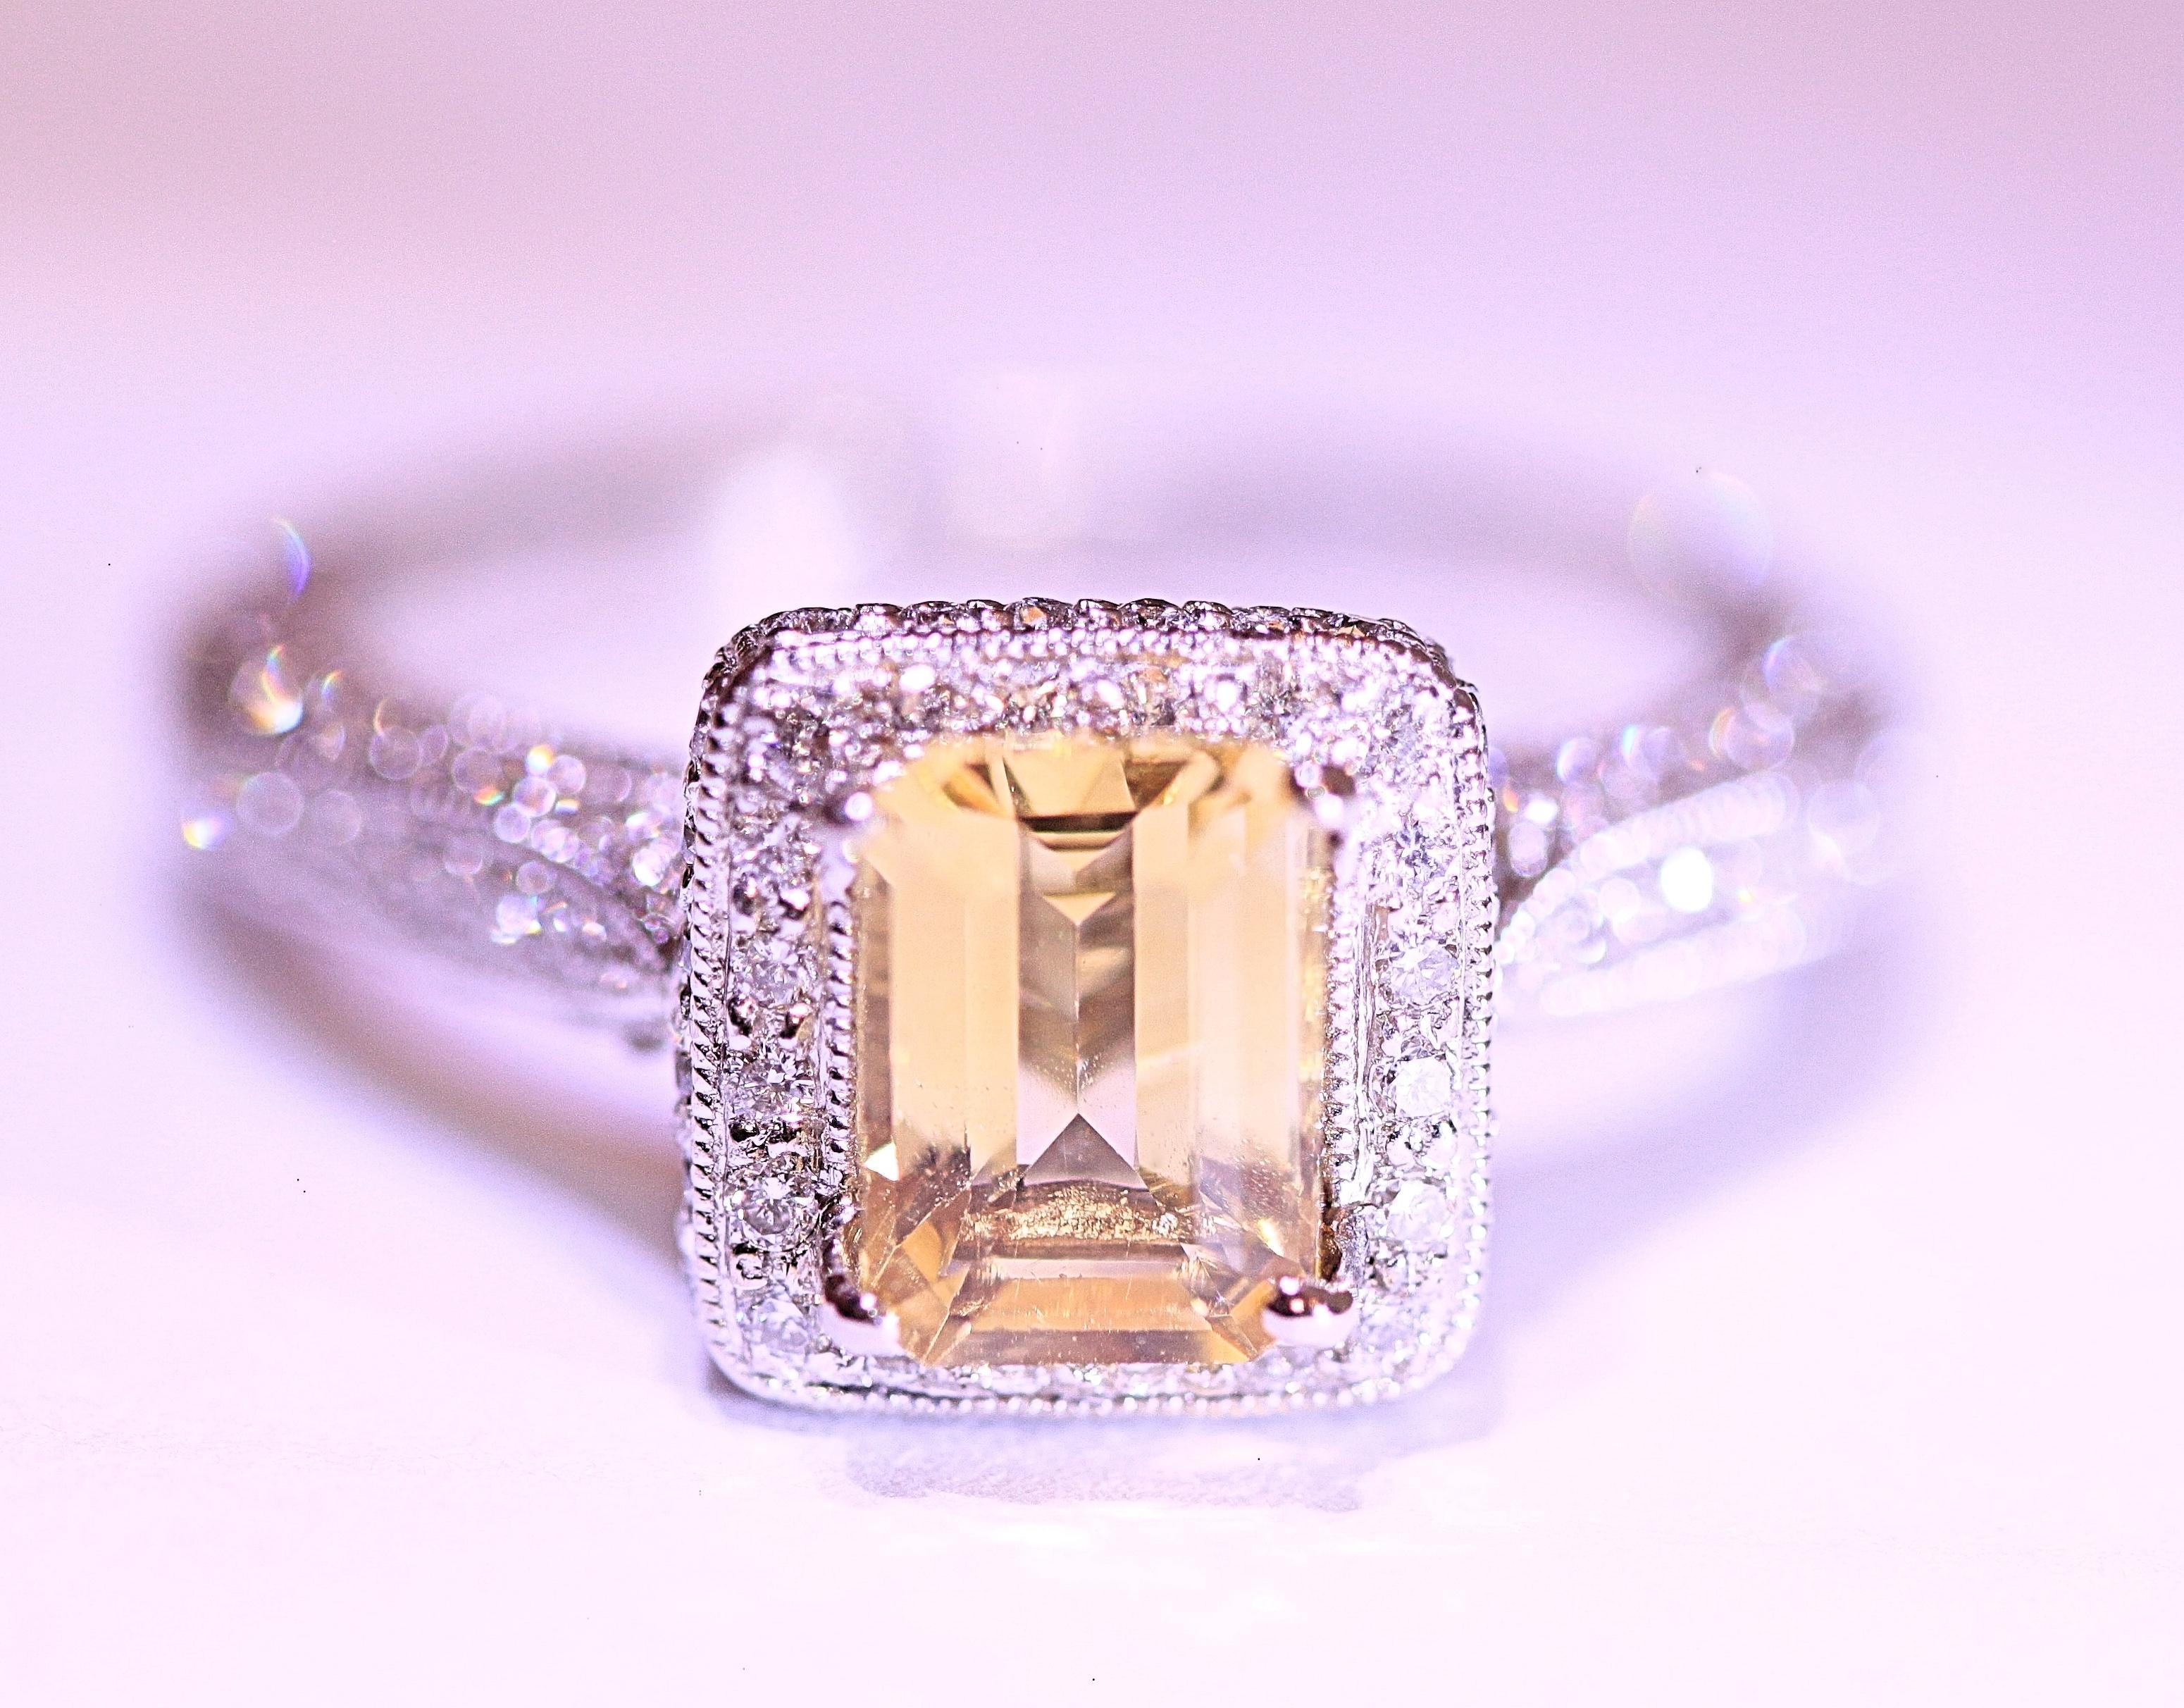 A beautiful, affordable citrine ring that can be used as an engagement ring or right hand ring.
The ring has one emerald cut citrine that weighs .84 carat total.  The citrine is surrounded by
pave' set round brilliant cut diamonds.  The diamonds